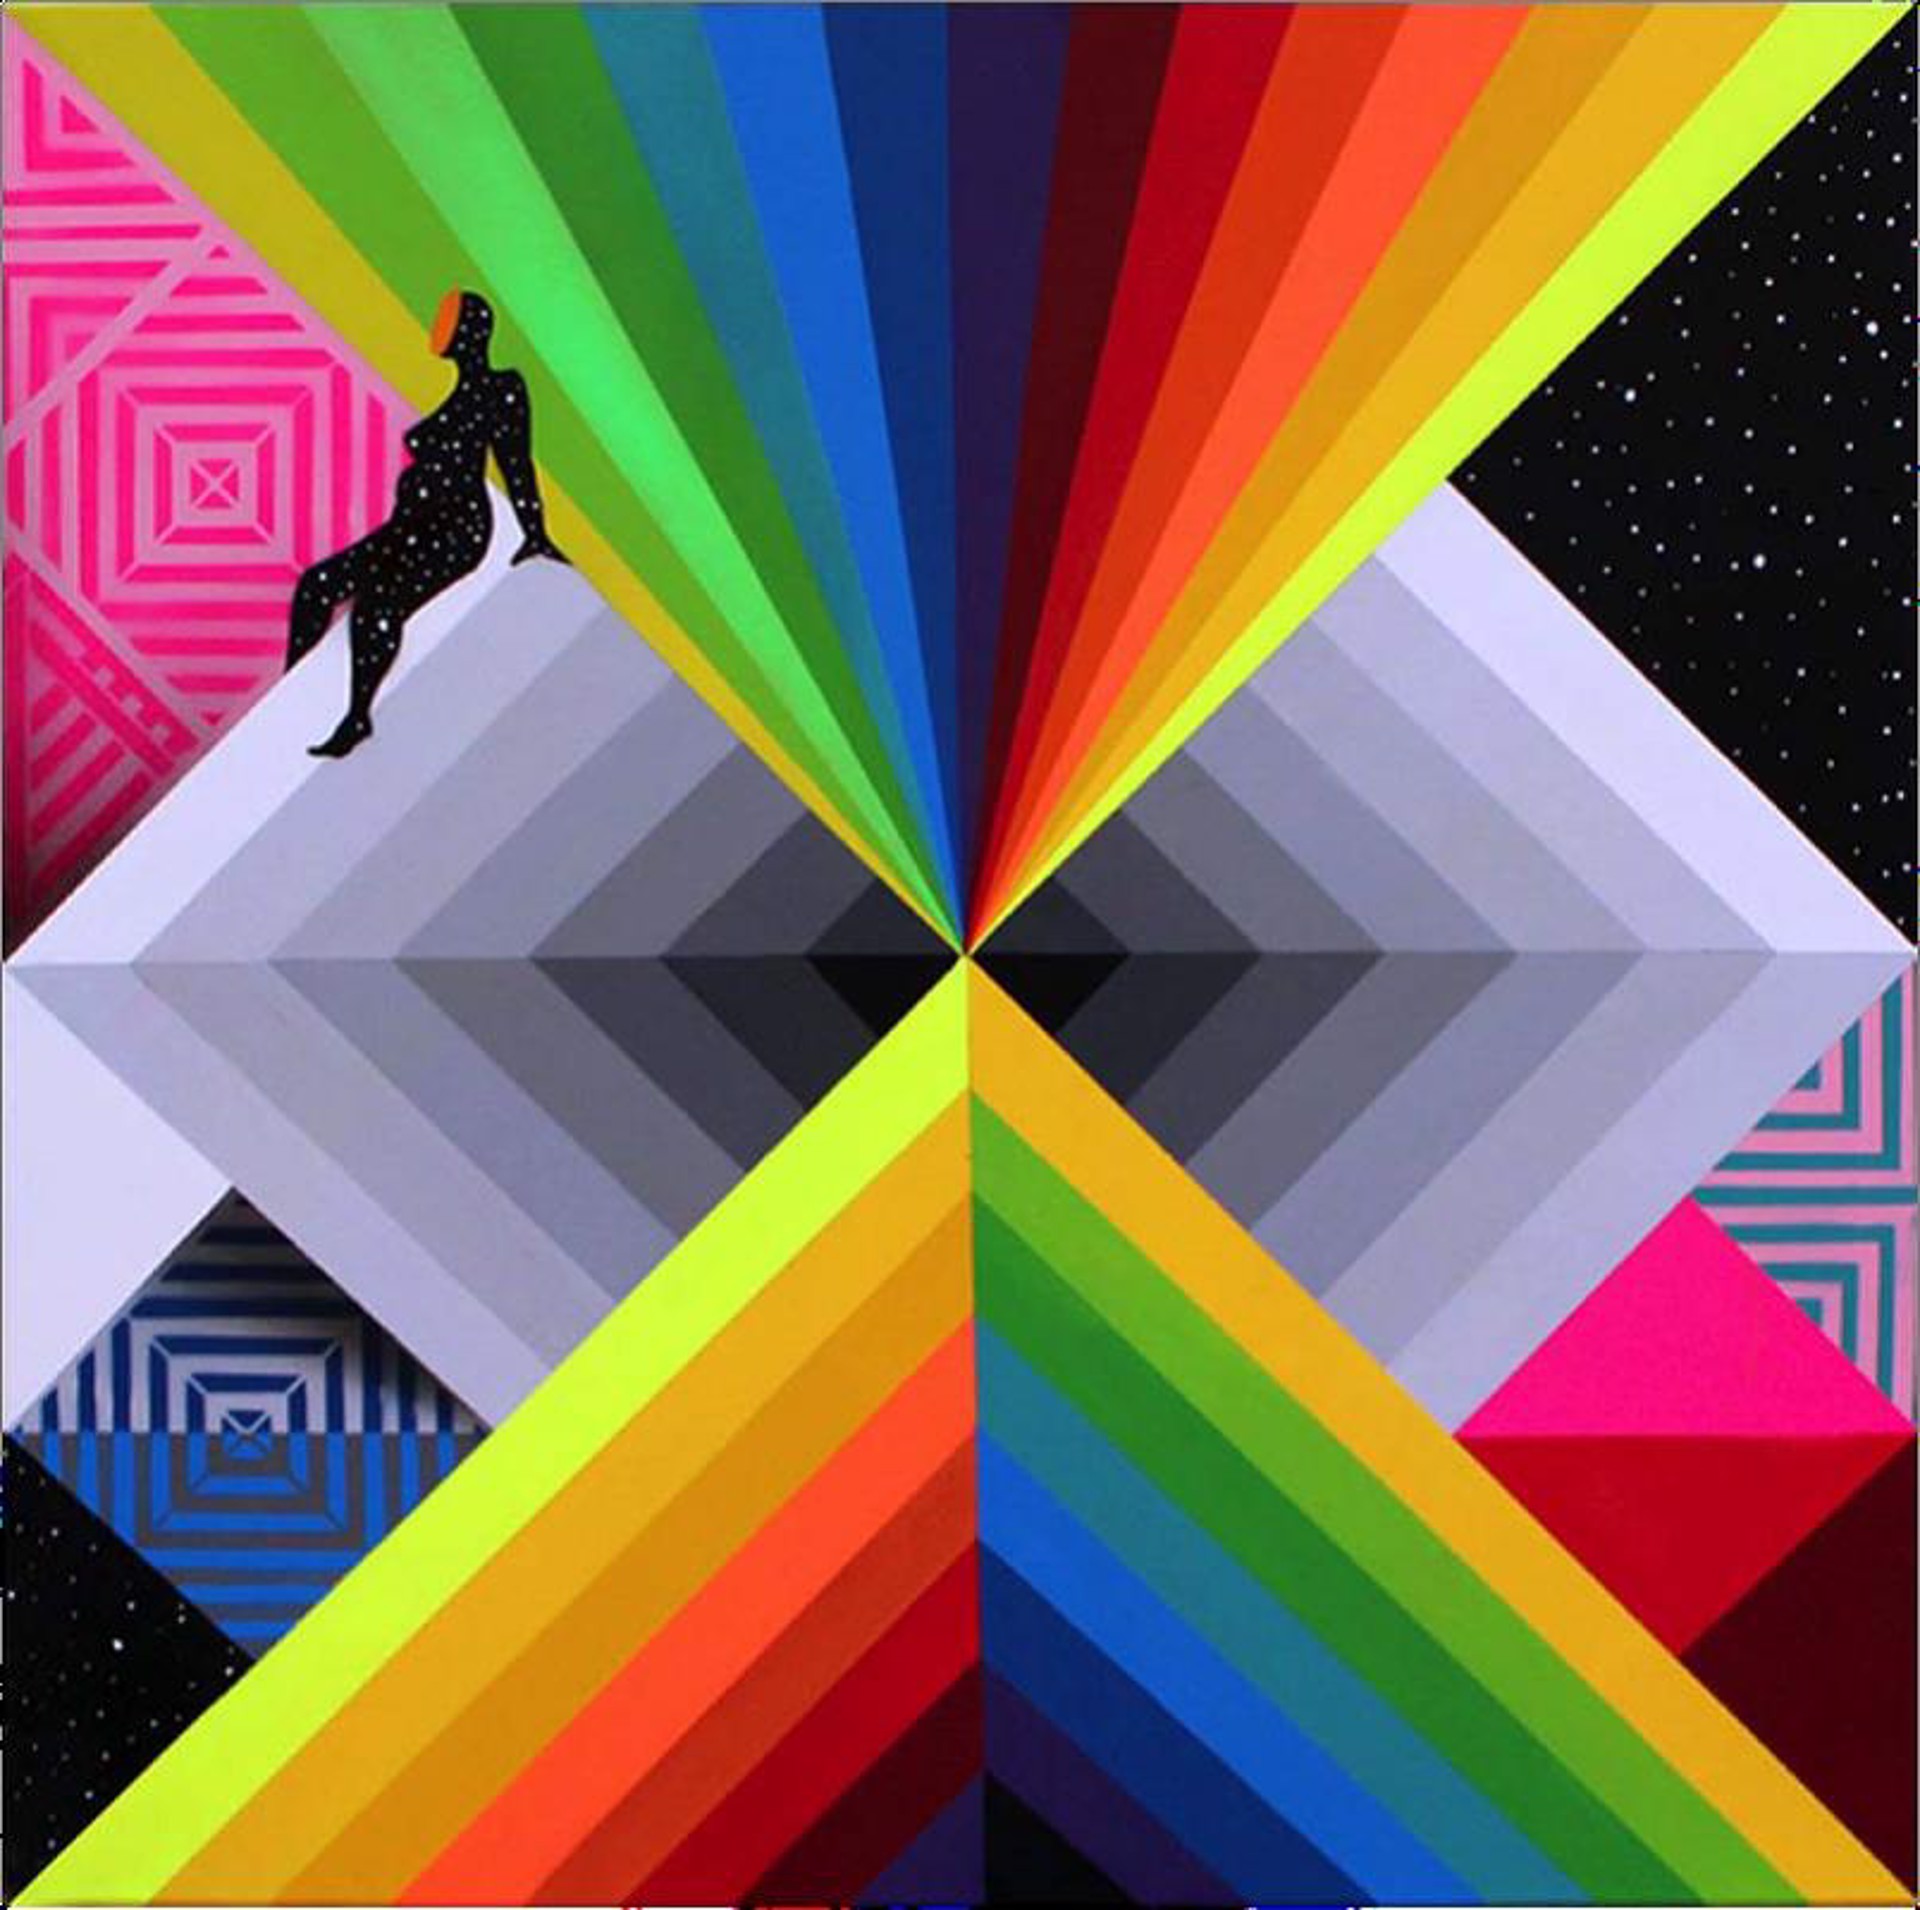 Impossible Perspectives II by Okuda San Miguel